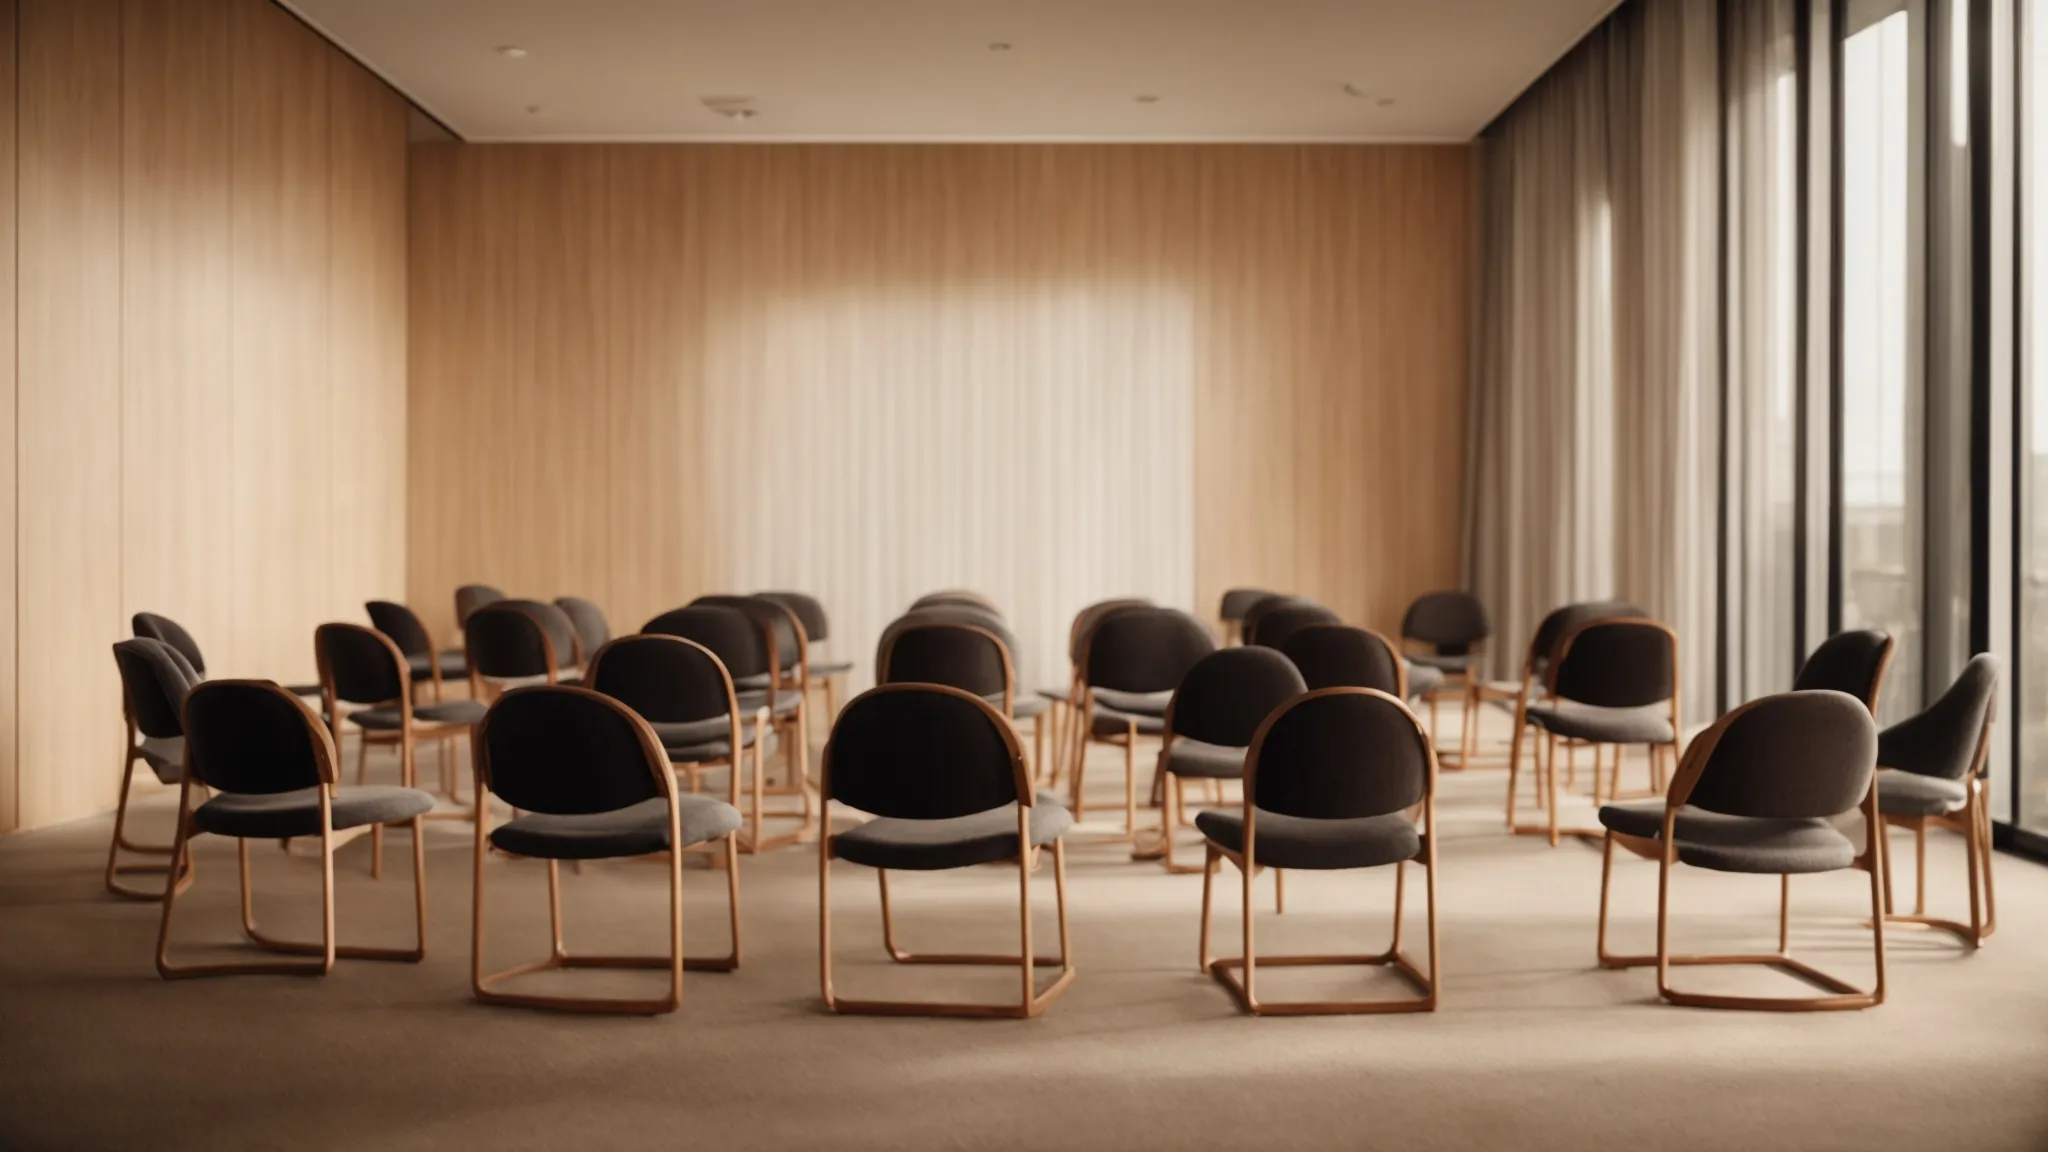 a circle of chairs in a warmly lit room, awaiting the arrival of employees for a peer support group session.